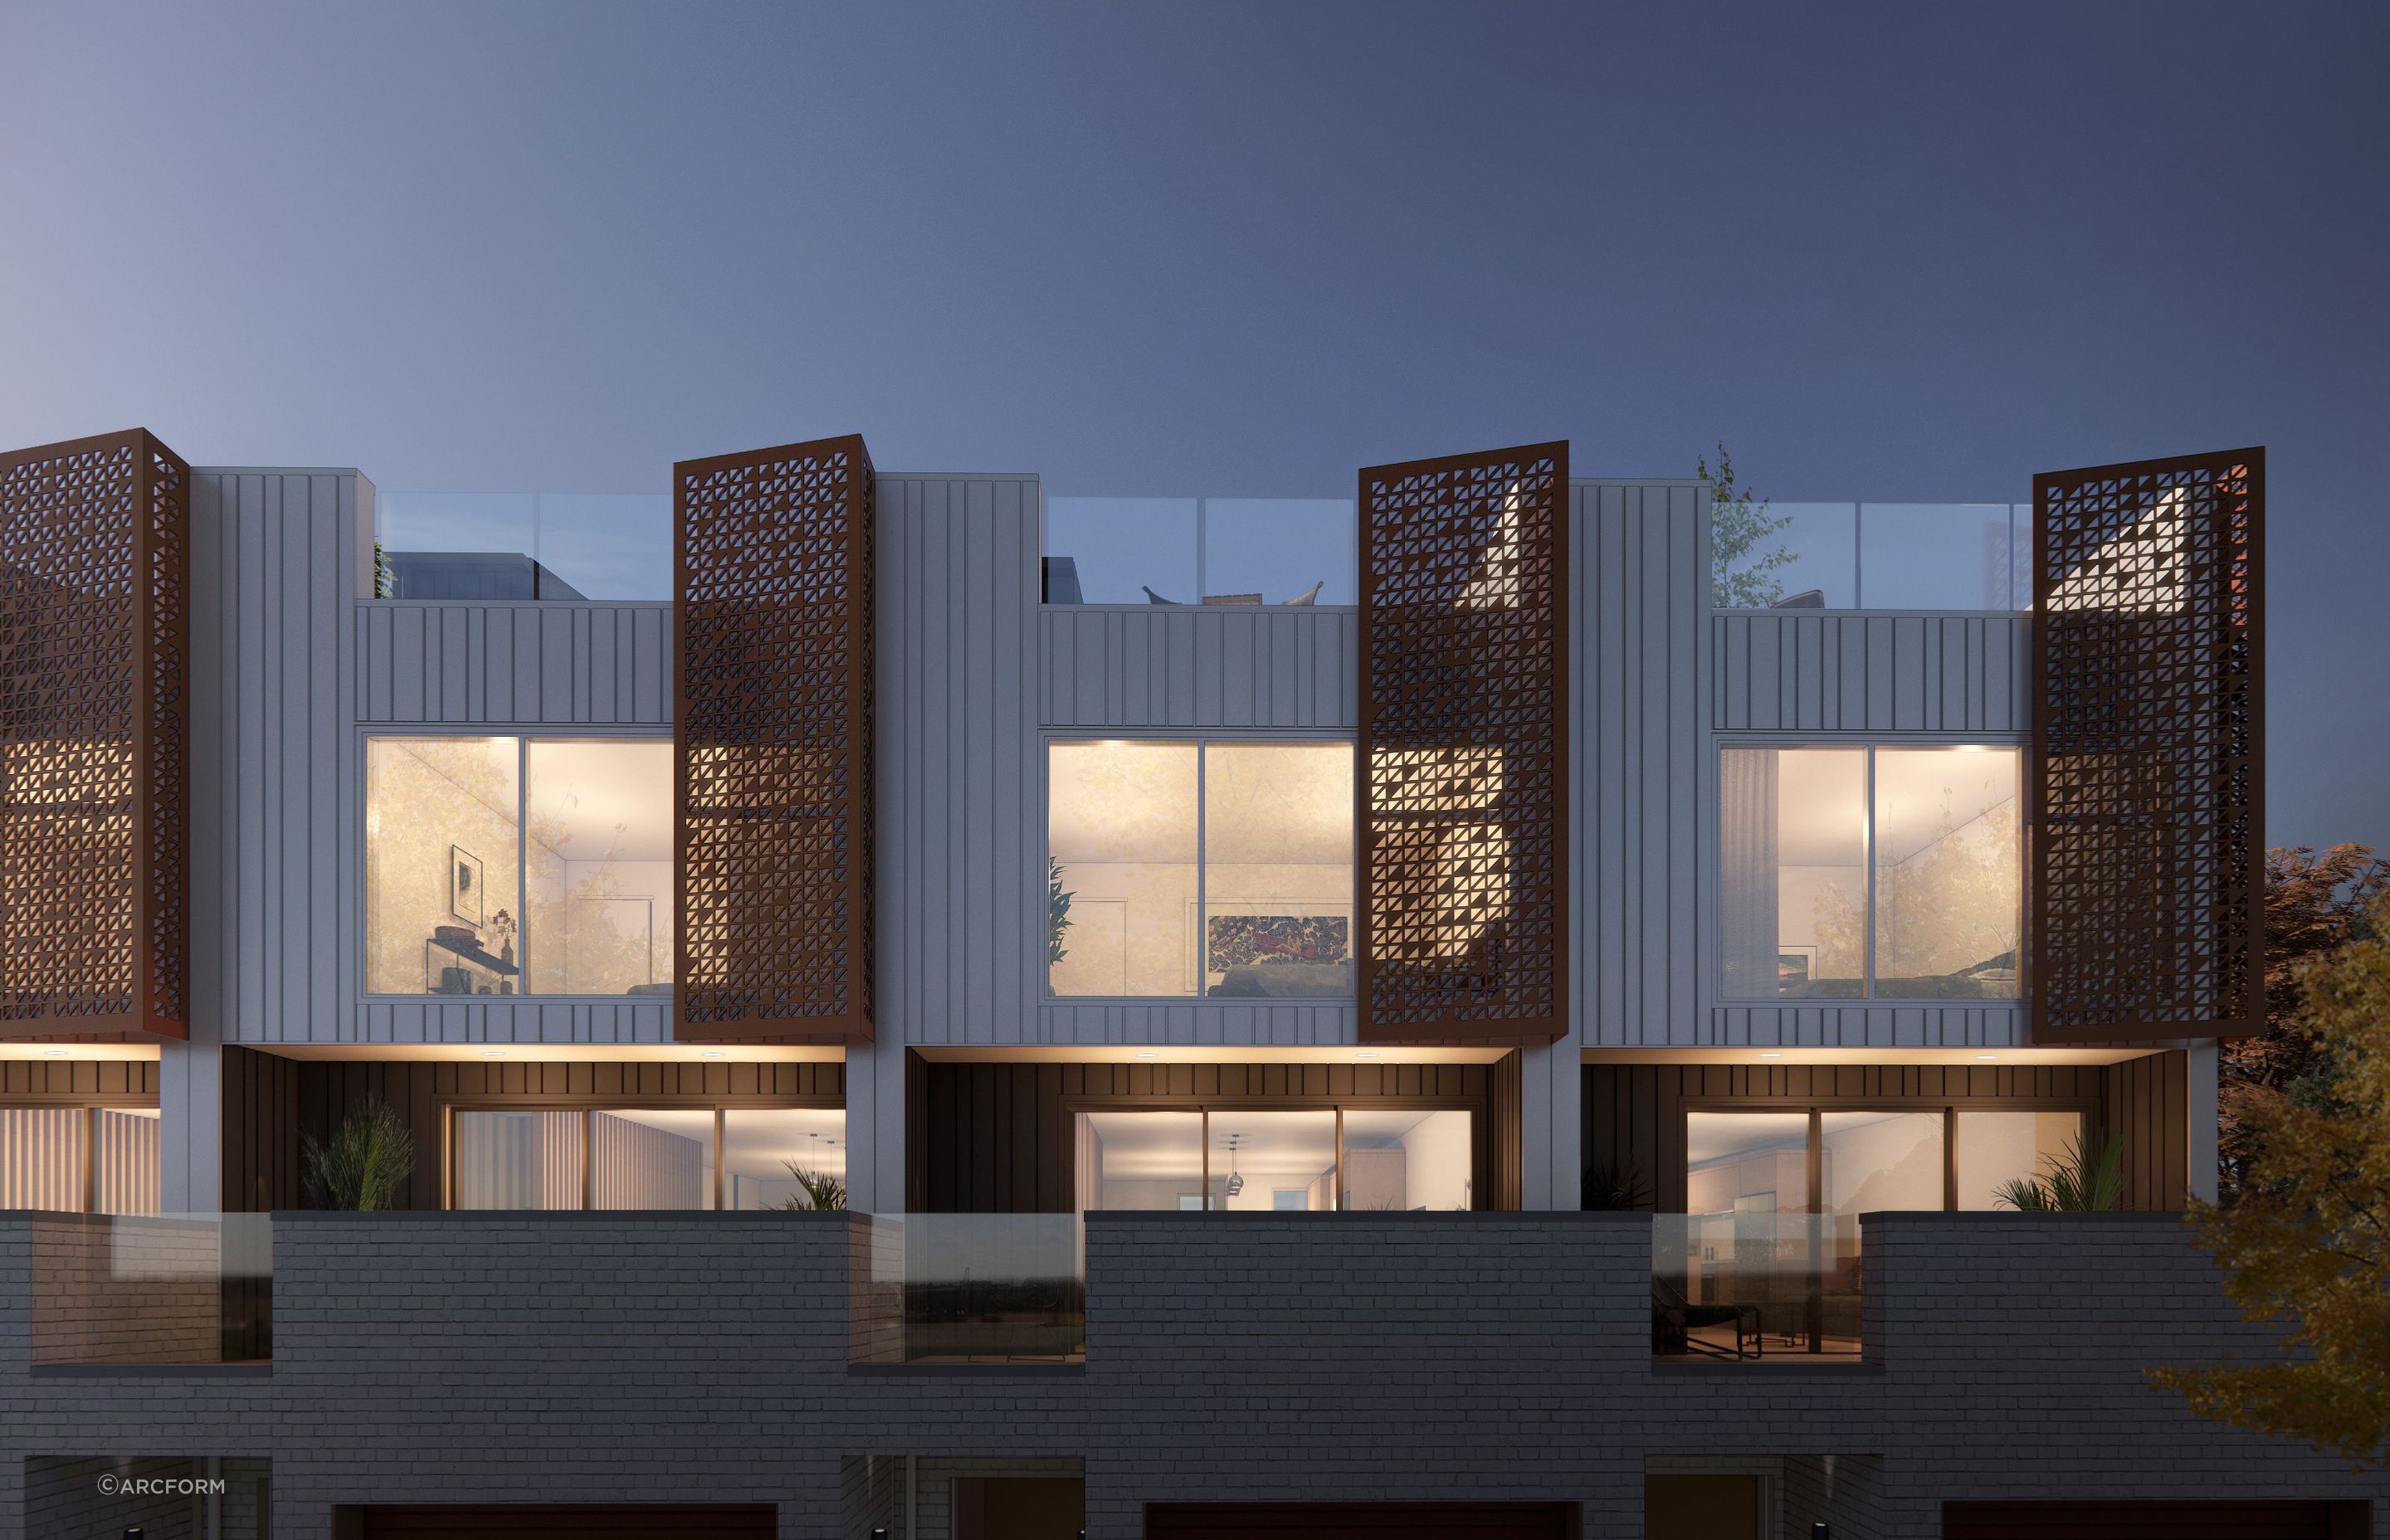 The complex aims to maximise the views out to the Manukau Harbour.